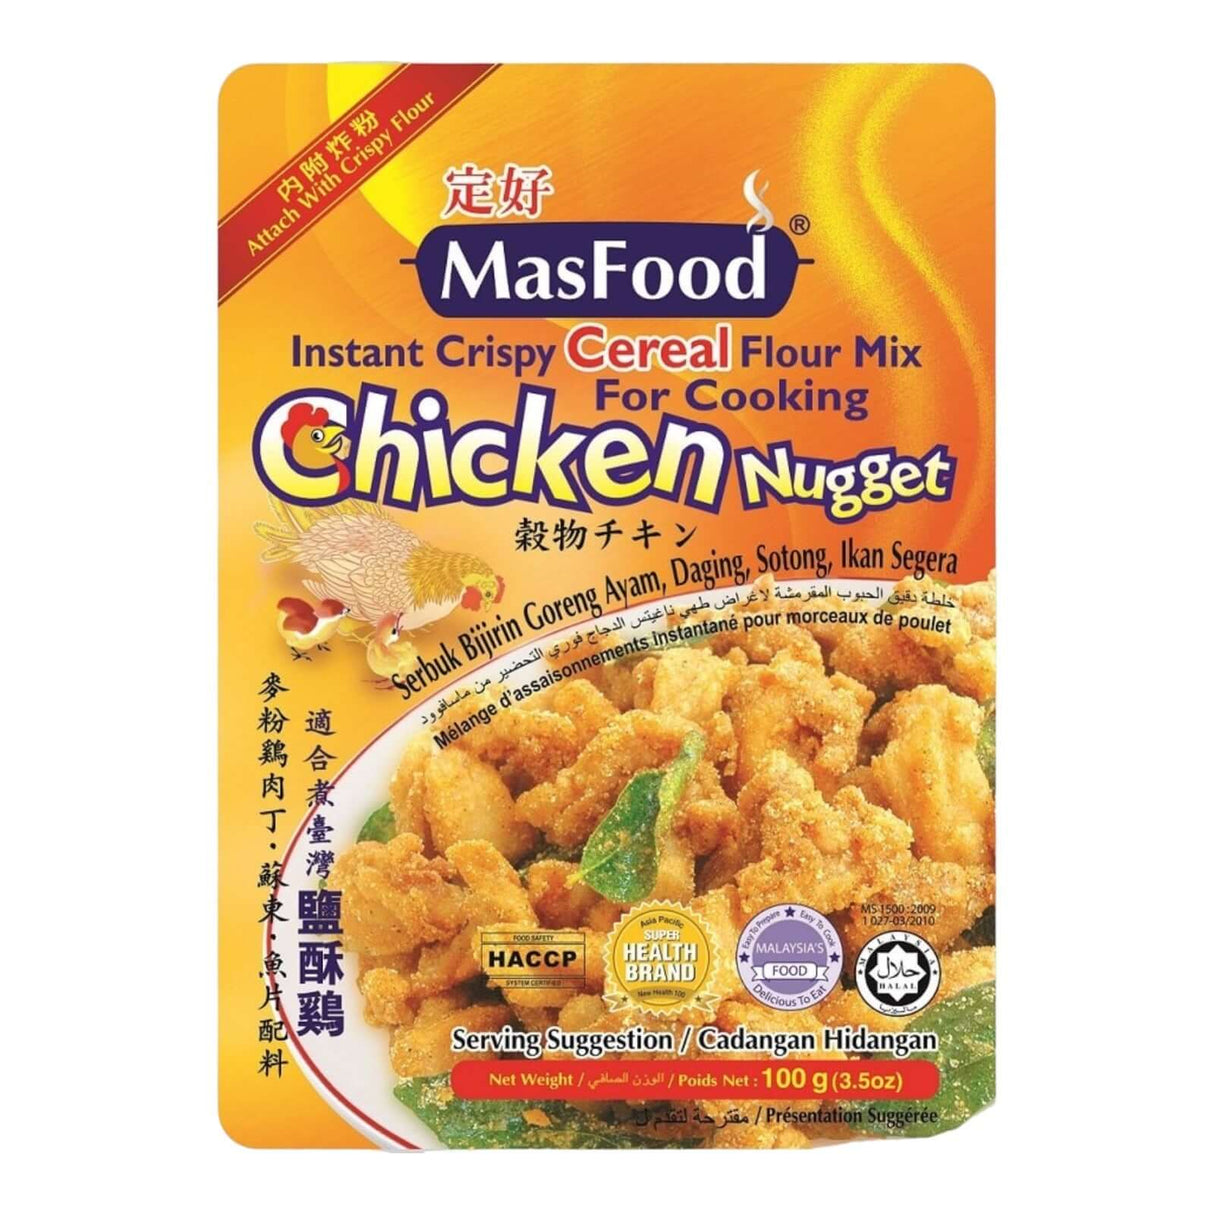 MasFood Instant Crispy Cereal Flour For Chicken Nugget